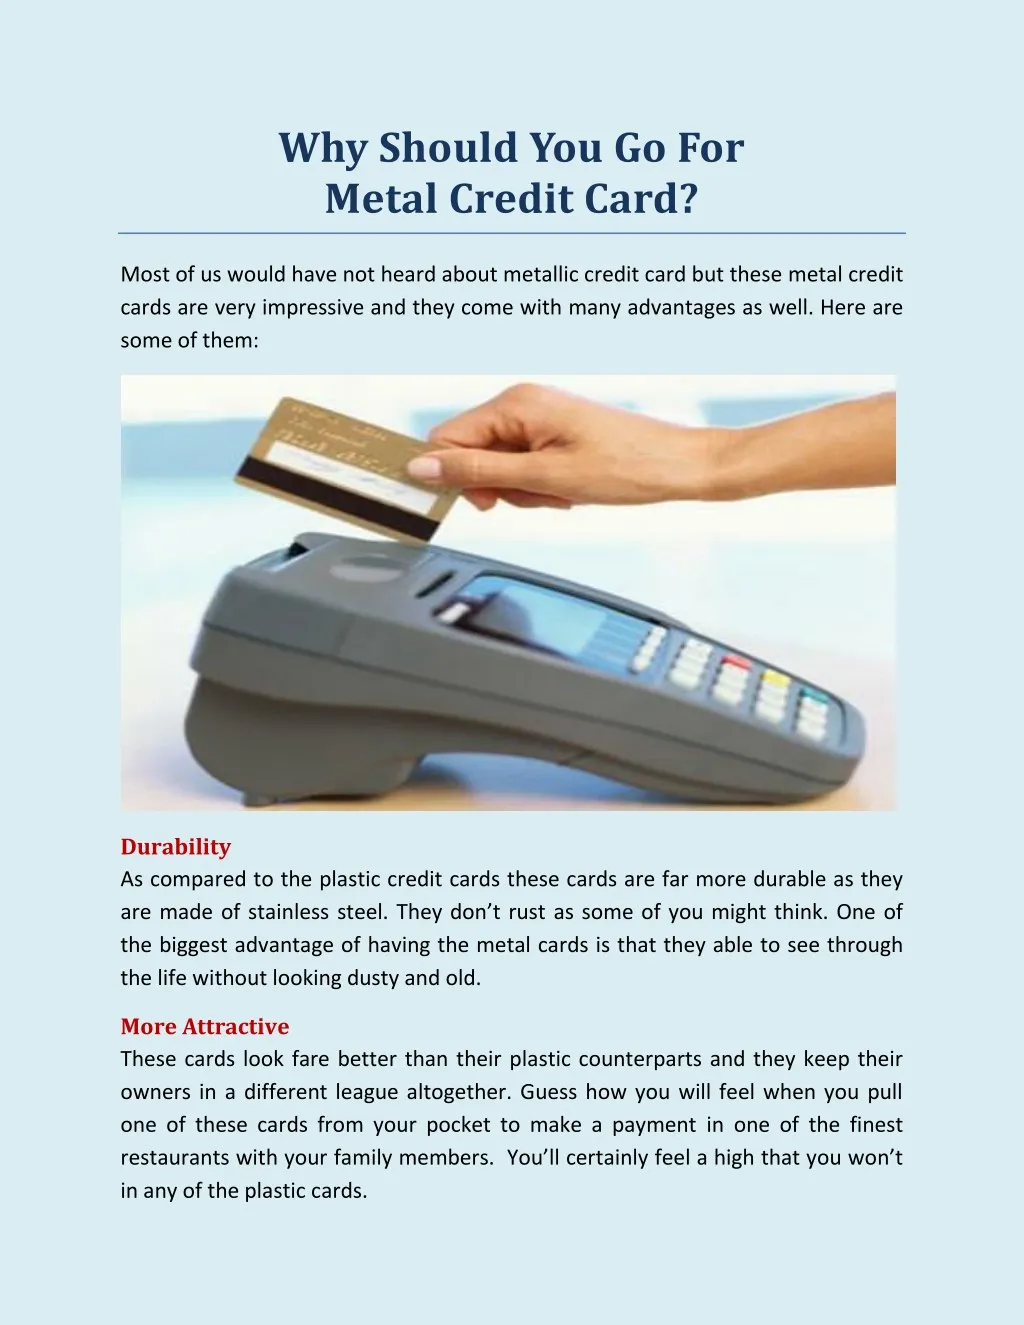 why should you go for metal credit card